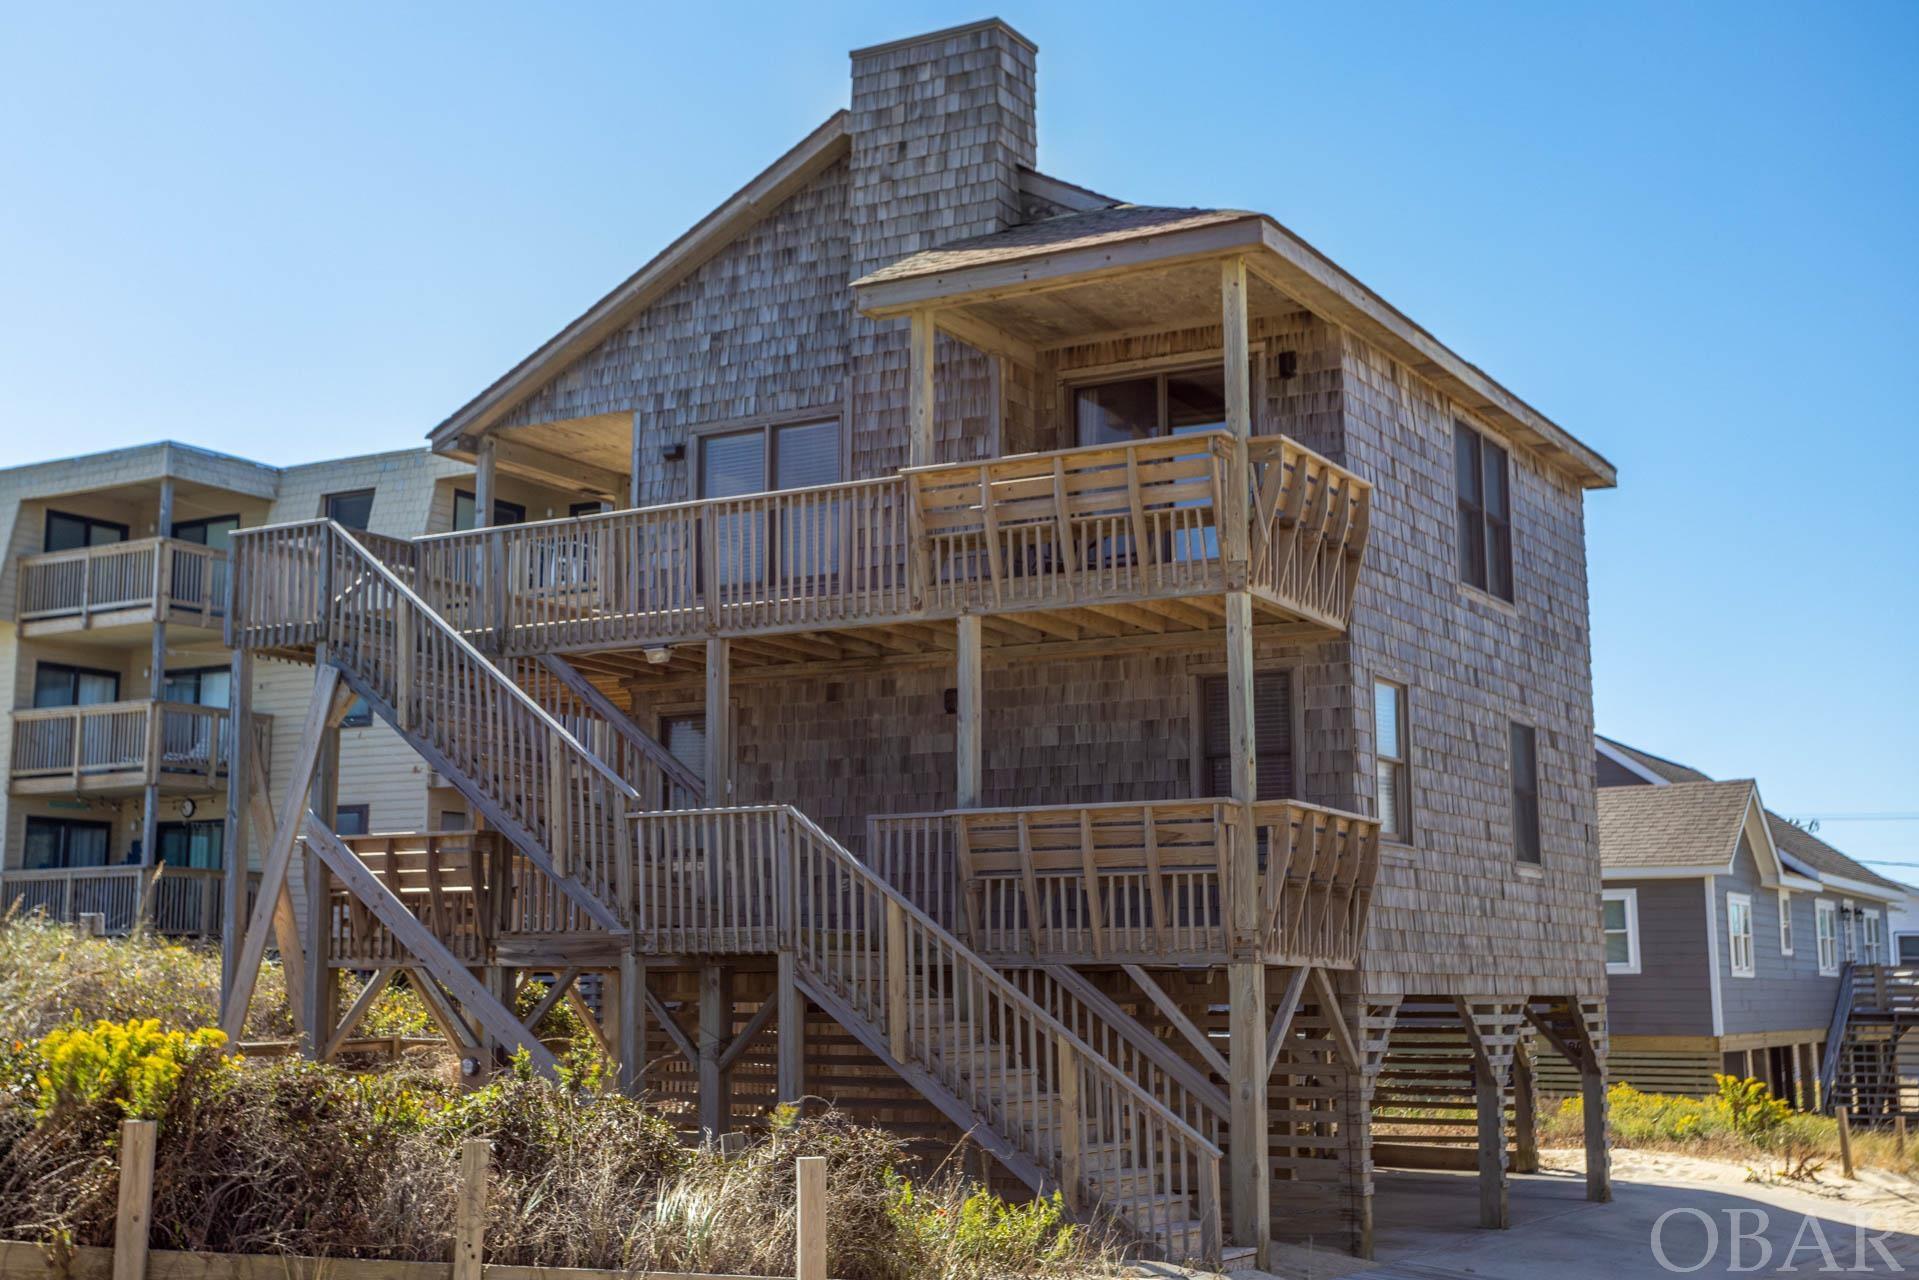 Nestled just 50 ft from the sand, this Kill Devil Hills semi-ocean front home is an ideal sanctuary for those who seek the perfect blend of comfort, convenience, and captivating views. The double layer decks offer the perfect vantage point to soak in the soothing sound of the waves and relish in the stunning Outer Banks sunrises and sunsets. Inside you'll find 4 good-sized bedrooms and 2 1/2 baths with a reverse floor plan. Hardwood flooring runs throughout the home with tile in the bathrooms. The top level is an open concept with full ocean views from nearly every seat. The electric fireplace is the perfect spot to quickly warm up on cool evenings. The kitchen and bathrooms have been updated and the decks replaced in 2022. Beyond the beach, you will find an array of dining options, ensuring you'll never venture far for a great meal. This property is your ticket to the ultimate beachfront lifestyle. Don't miss your chance to own this stunning piece of paradise.